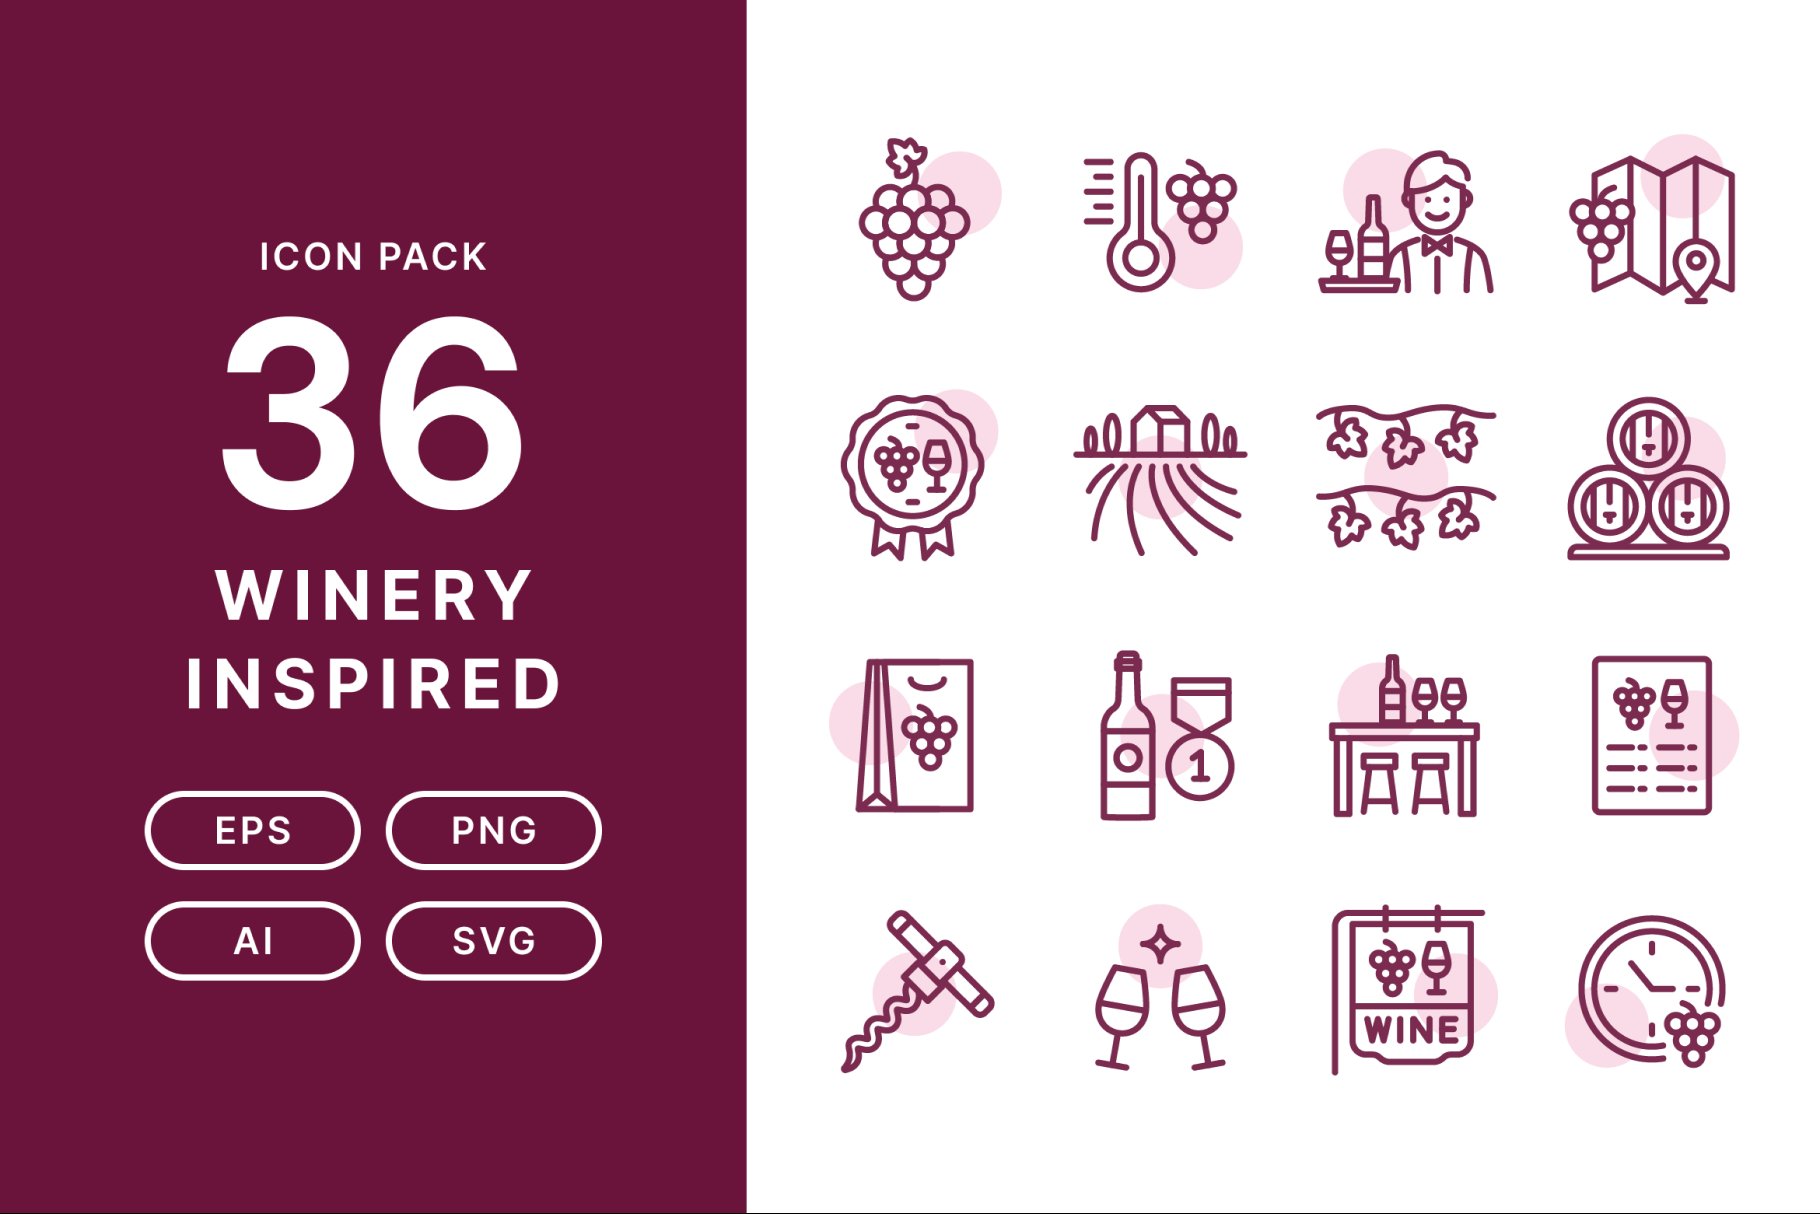 Winery Inspired — Icon Pack cover image.